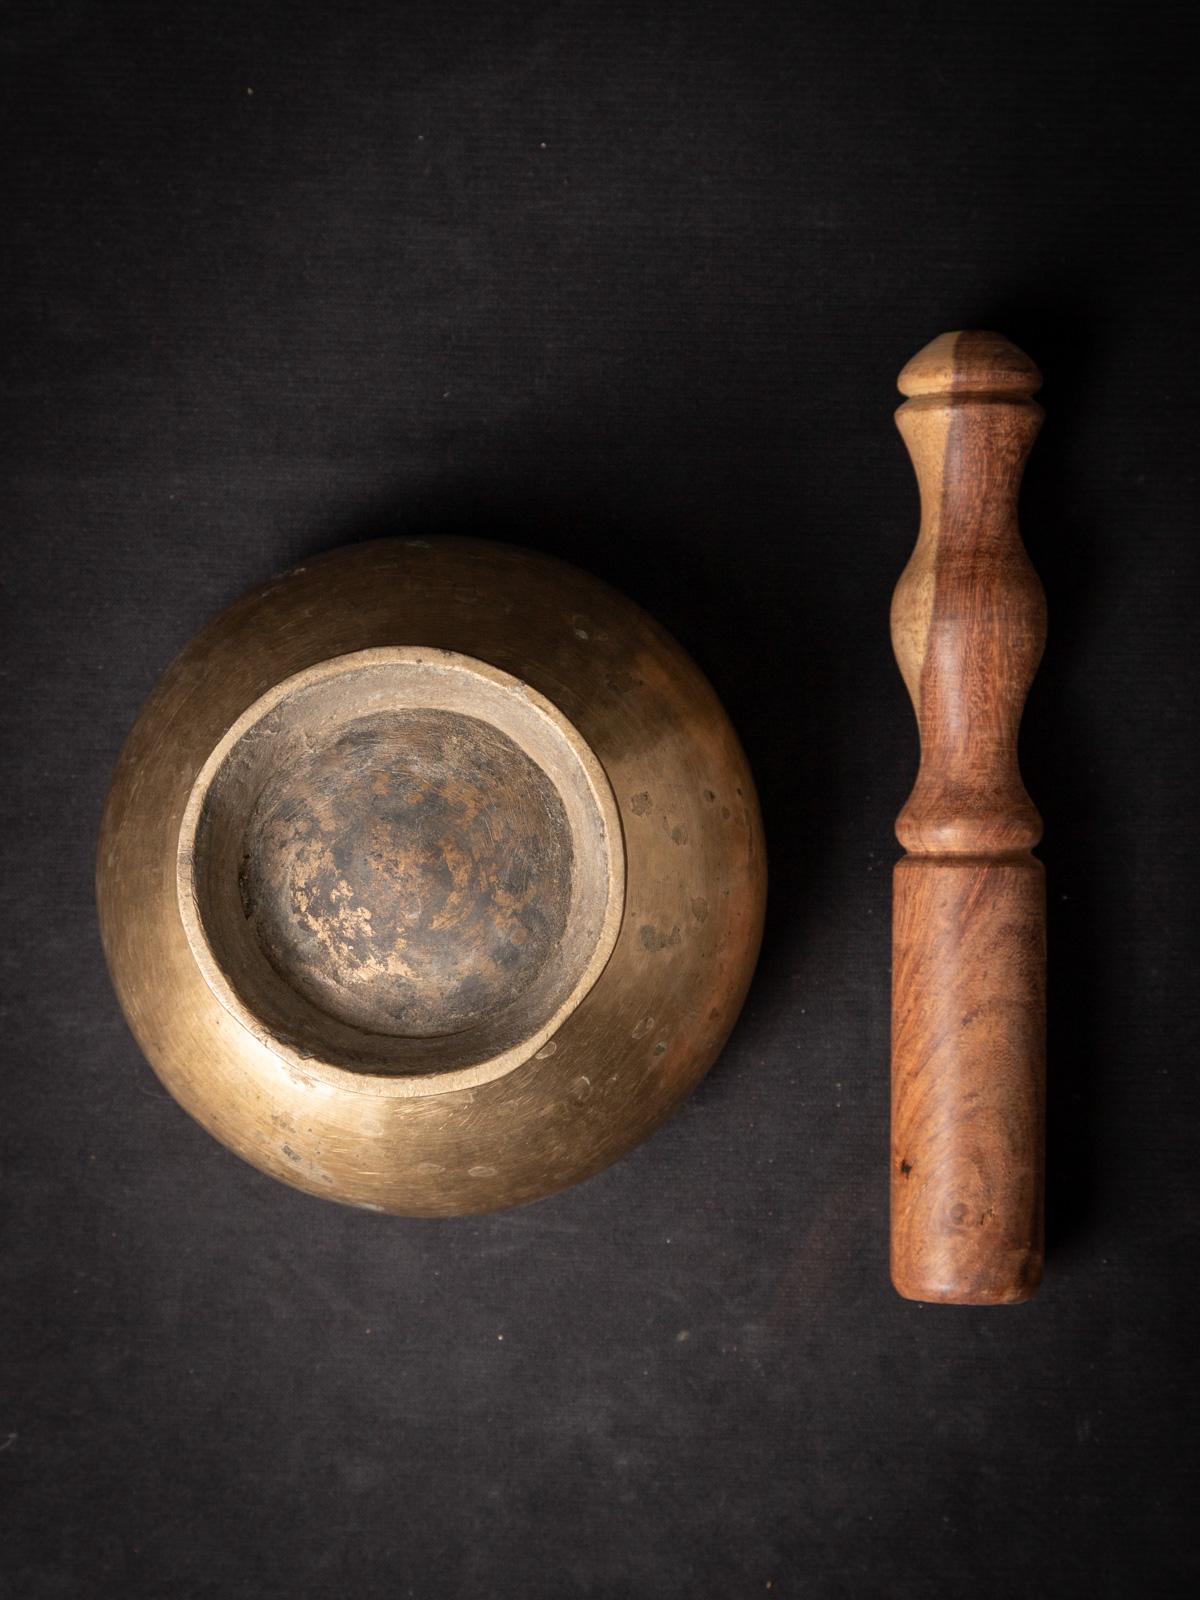 The old bronze Nepali singing bowl is a captivating musical instrument crafted from high-quality bronze. With a height of 8.3 cm and a diameter of 13 cm, this singing bowl emits resonant tones that evoke a sense of tranquility and harmony. Believed